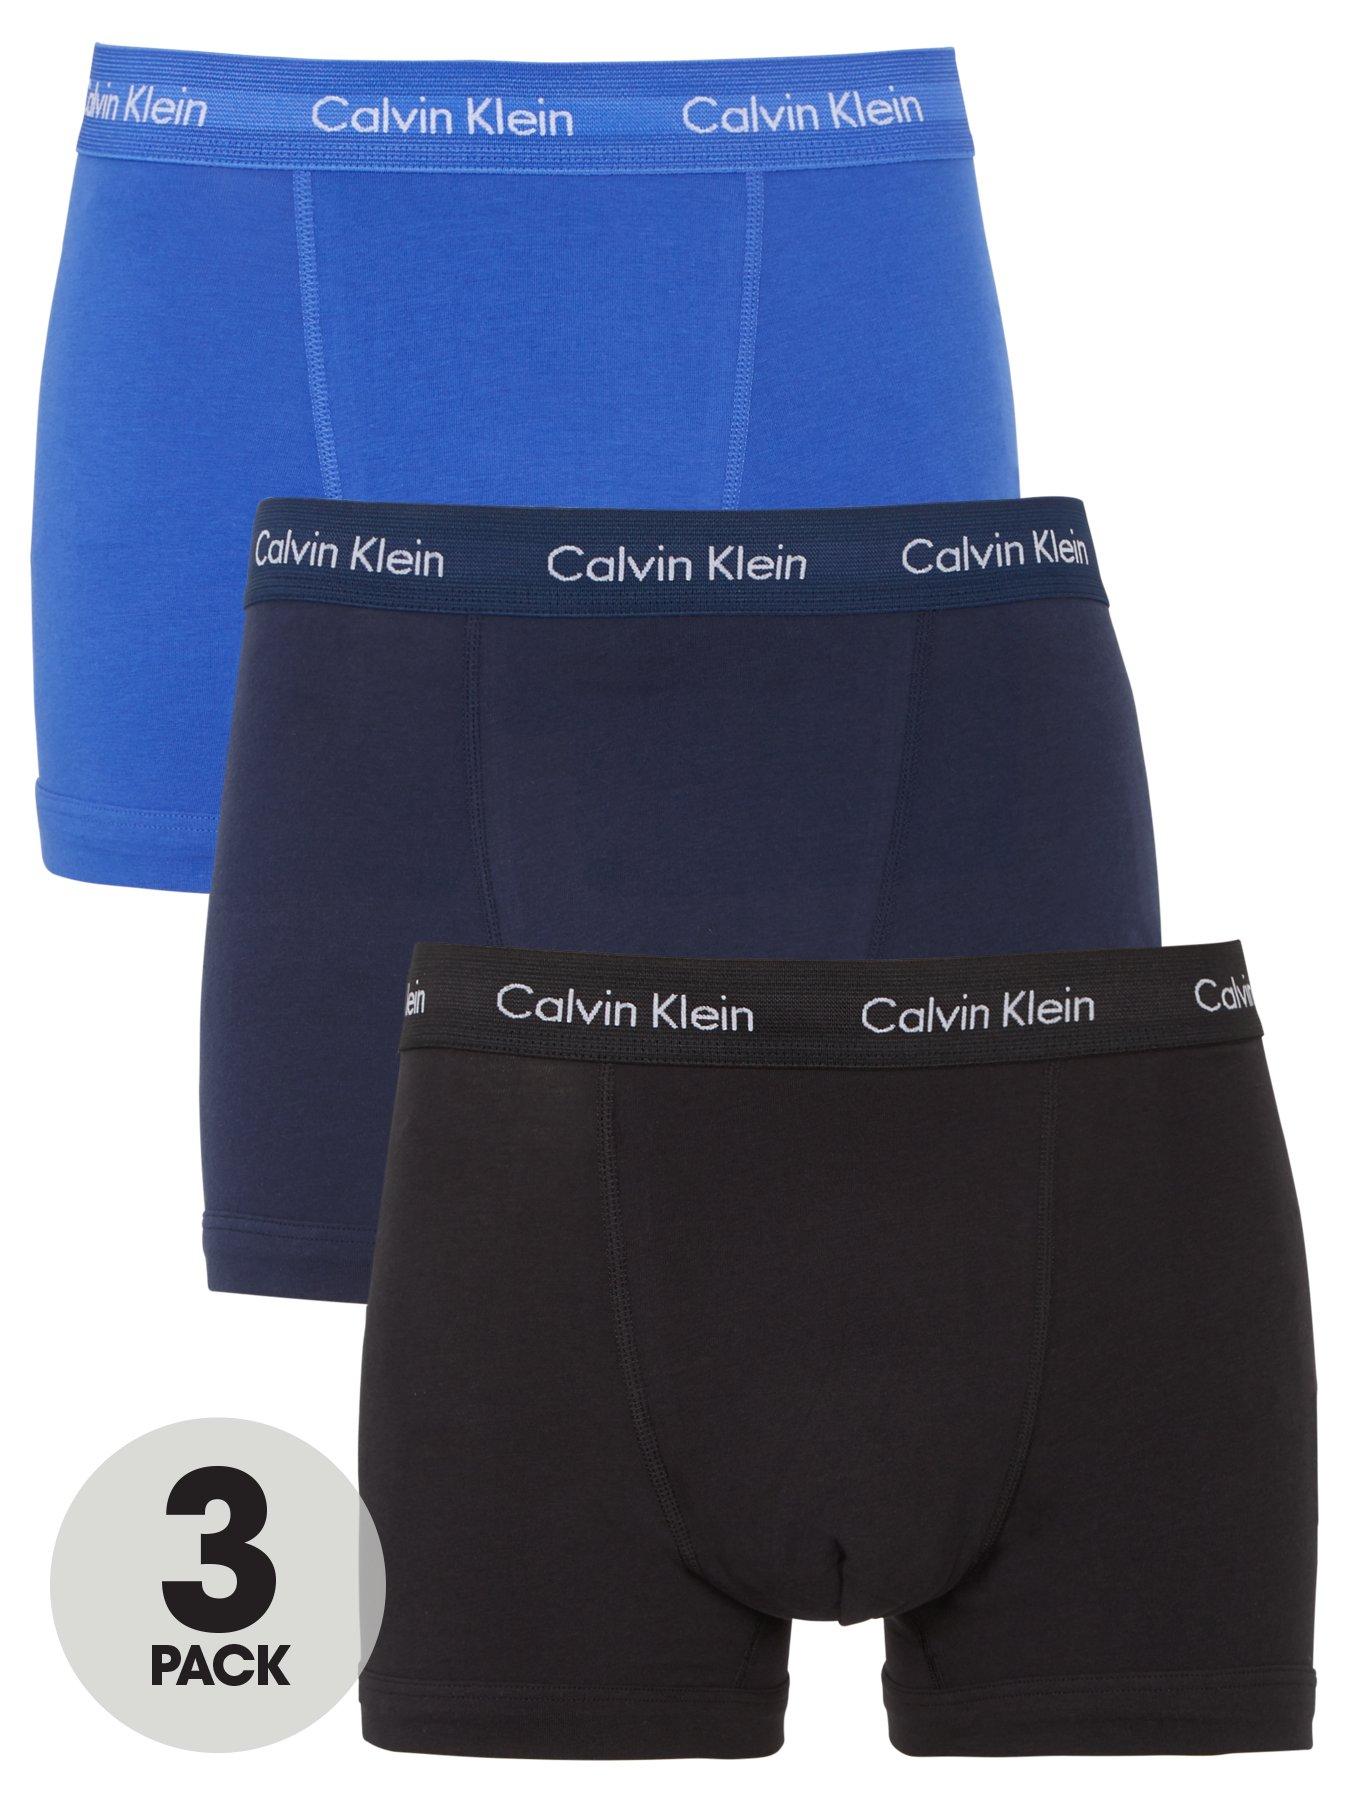 Save 36% Mens Clothing Underwear Boxers briefs GANT Cotton 3-pack Trunks in Black for Men 